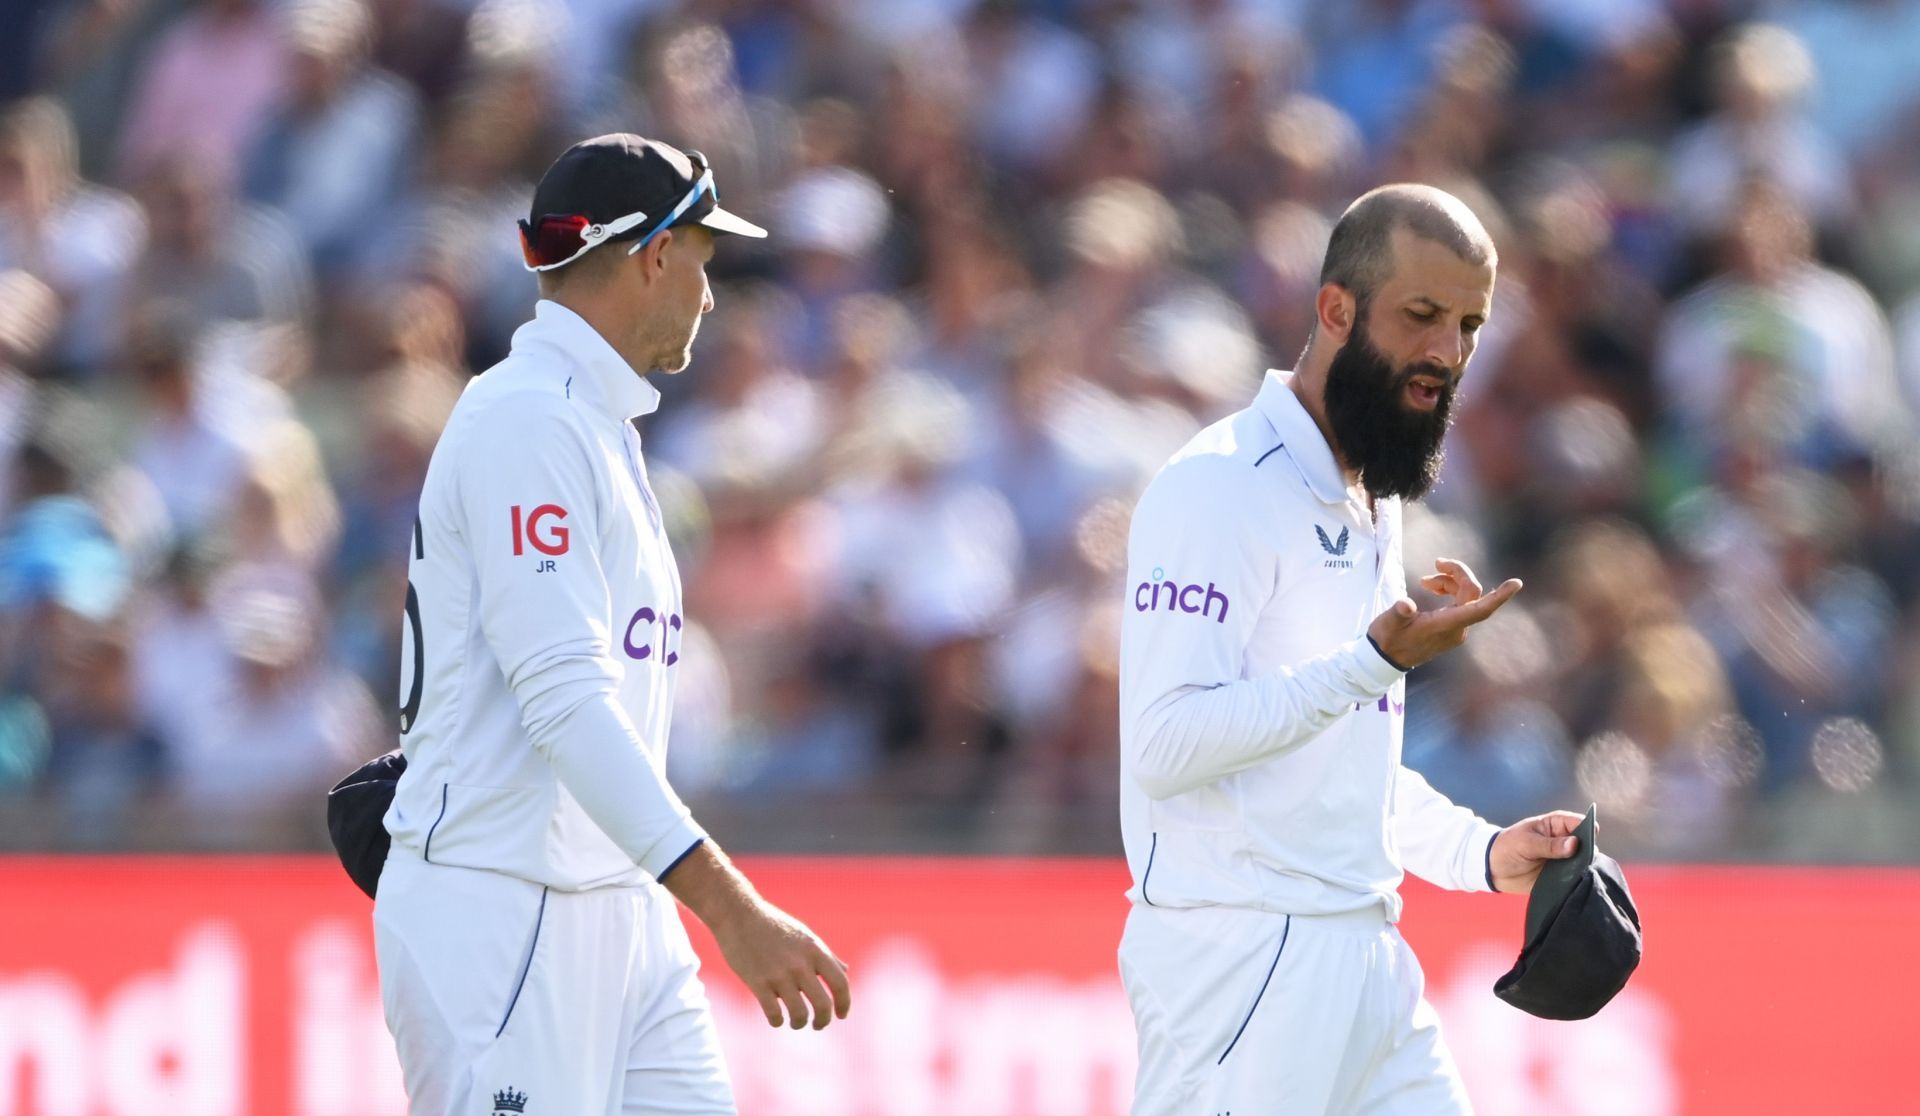 Moeen Ali might have a role to play on Day 5. (Pic: Getty Images)